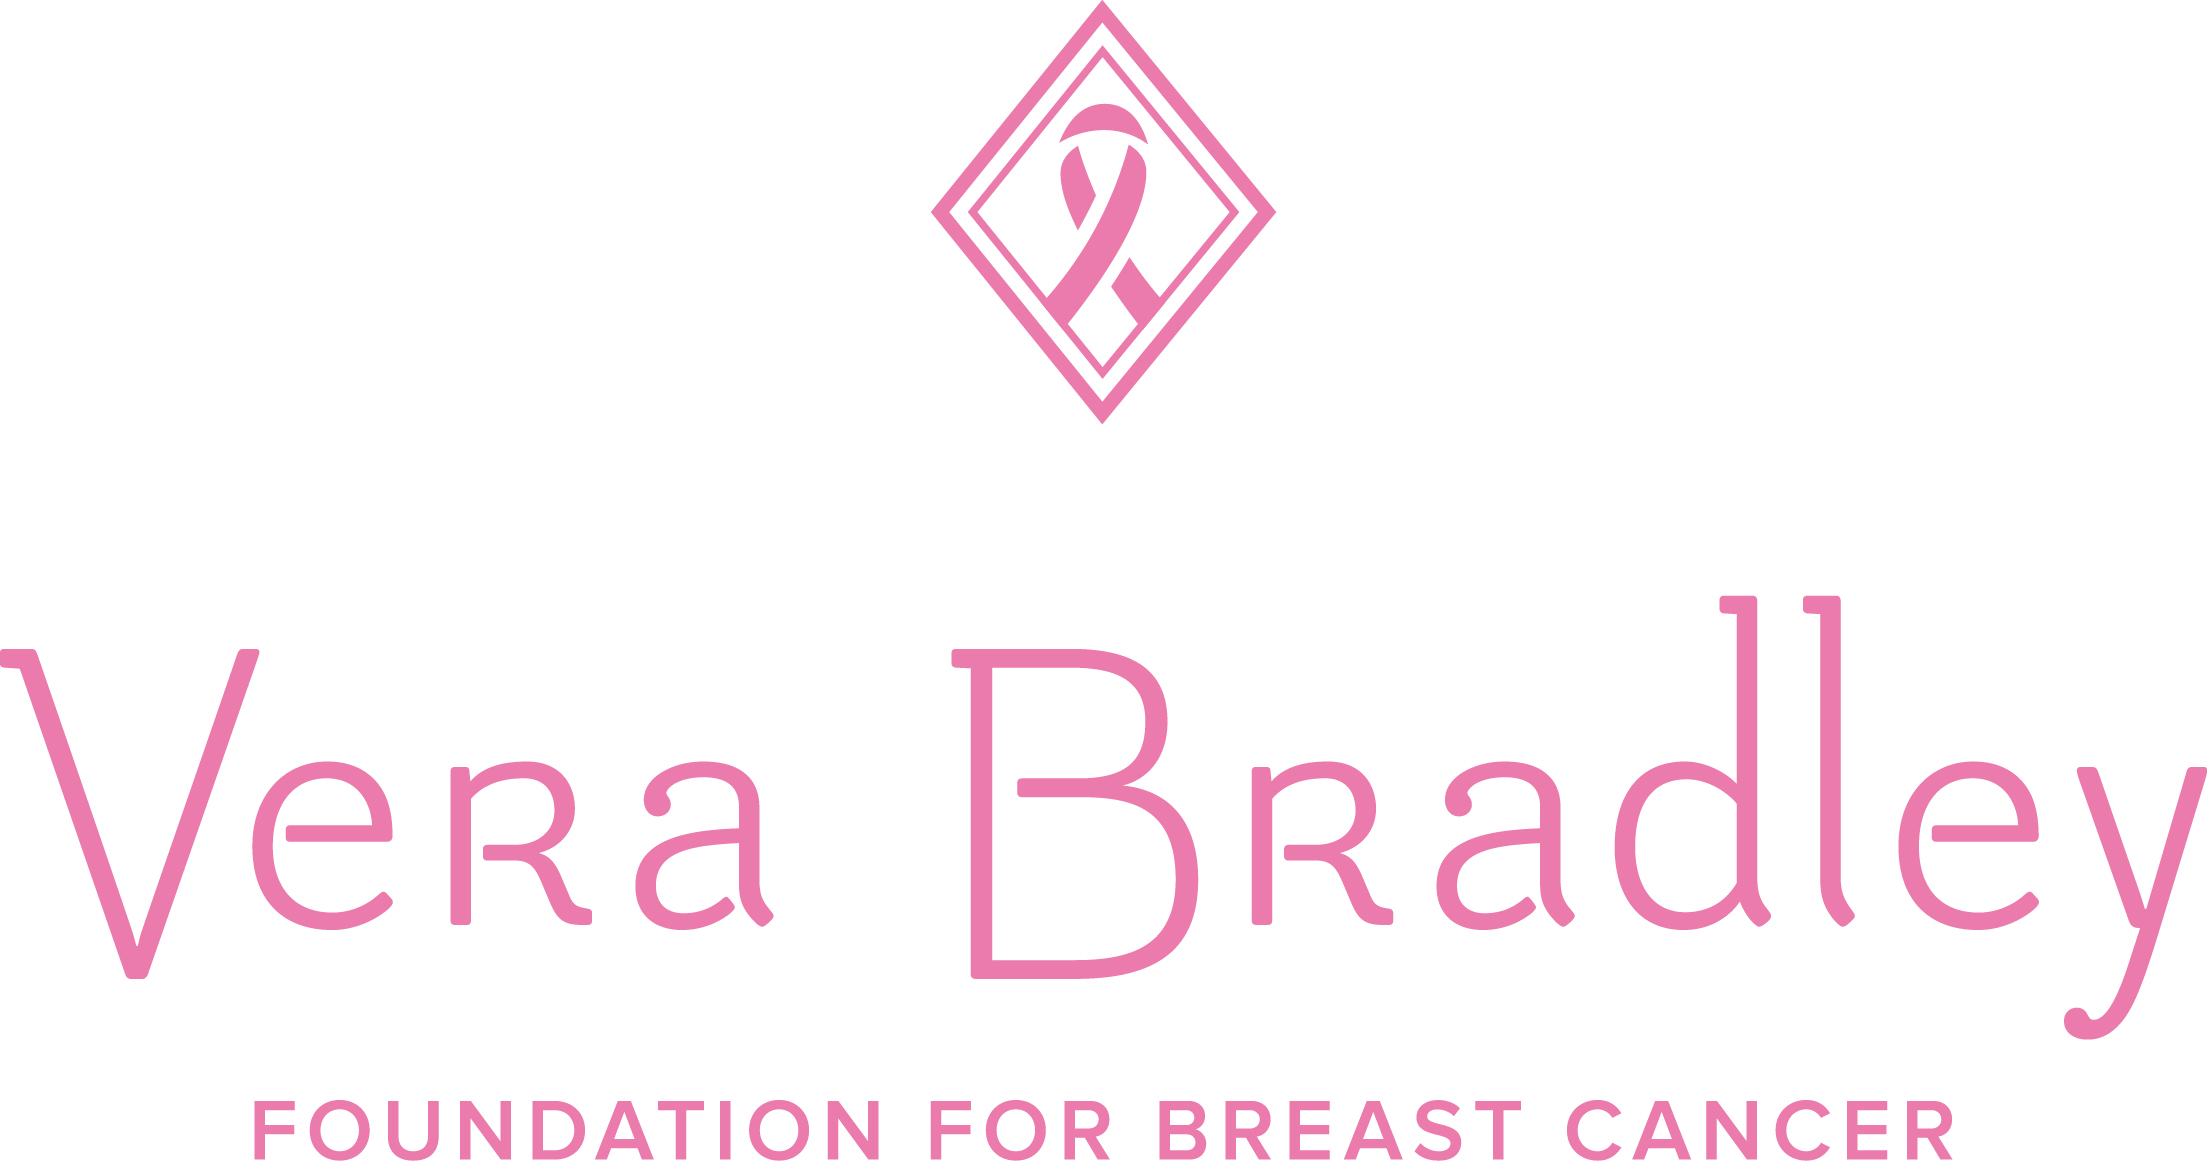 Vera Bradley Foundation for Breast Cancer Raises $1,513,713 for Breast Cancer Research